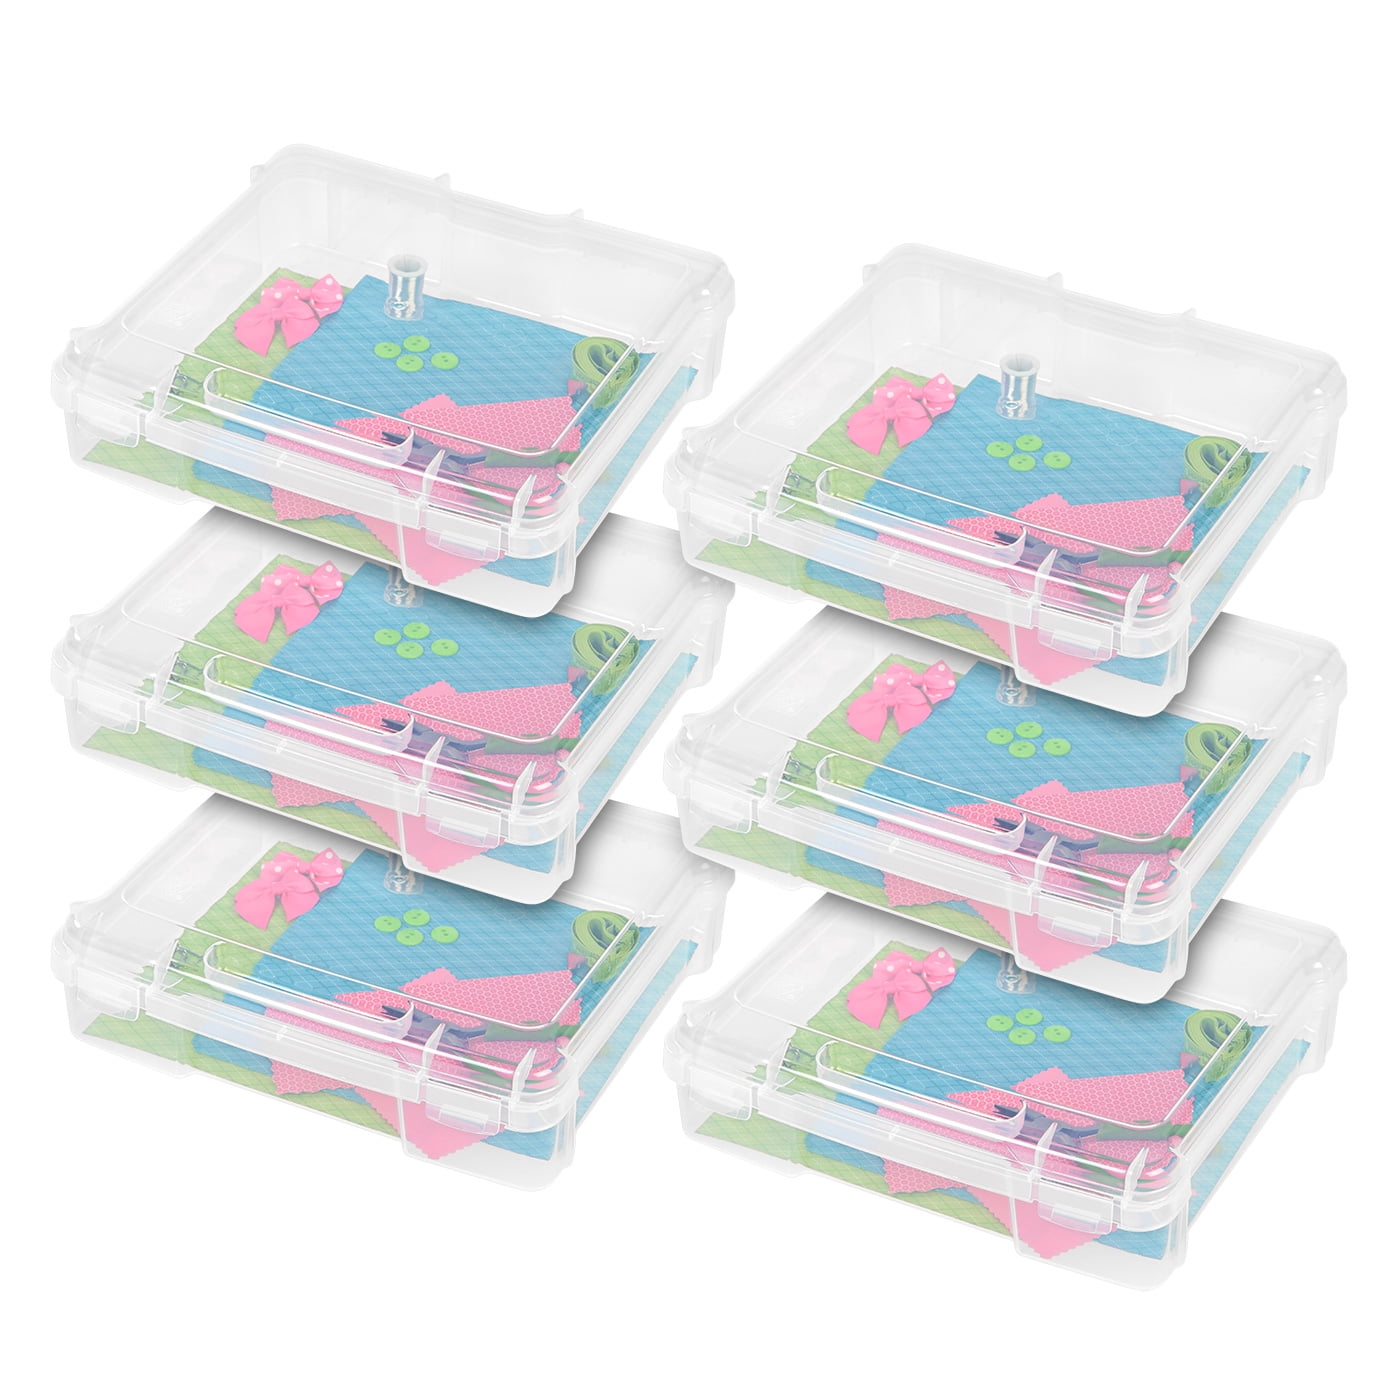 Clear/Spine: 21 mm 50 CheckOutStore Plastic Storage Cases for Rubber Stamps 